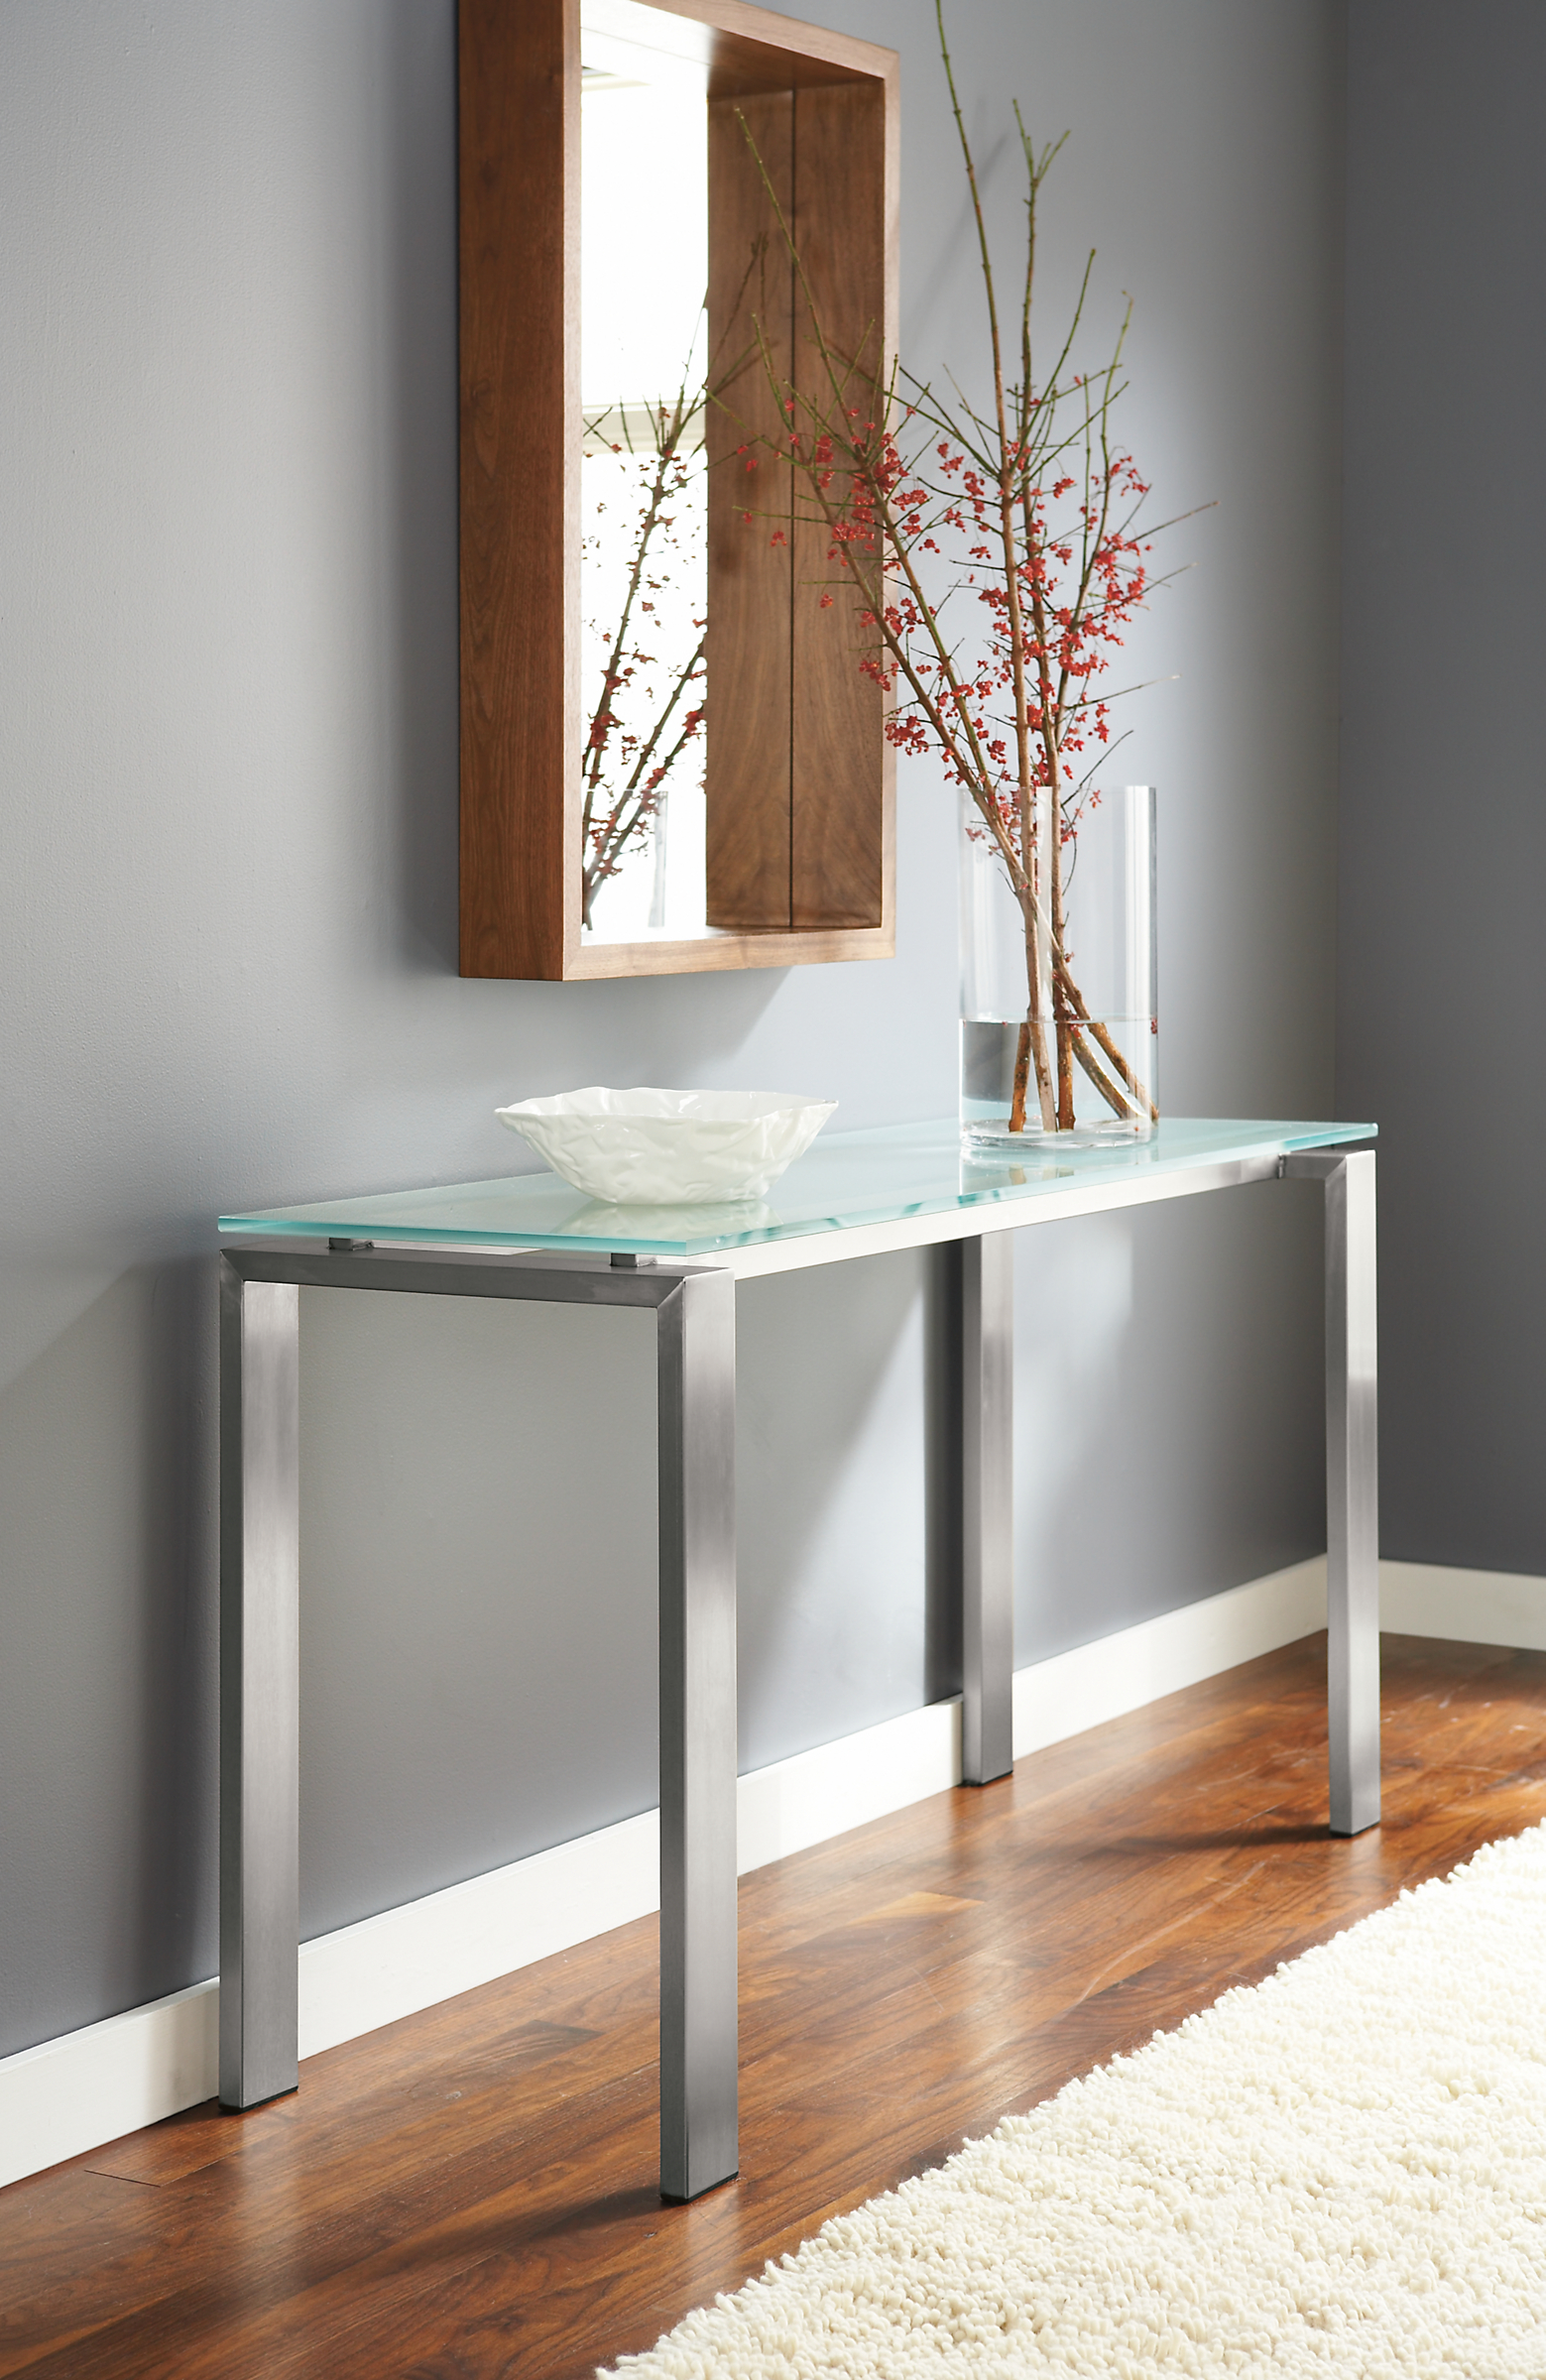 Detail image of Rand 54-by-18 high console table in stainless steel.